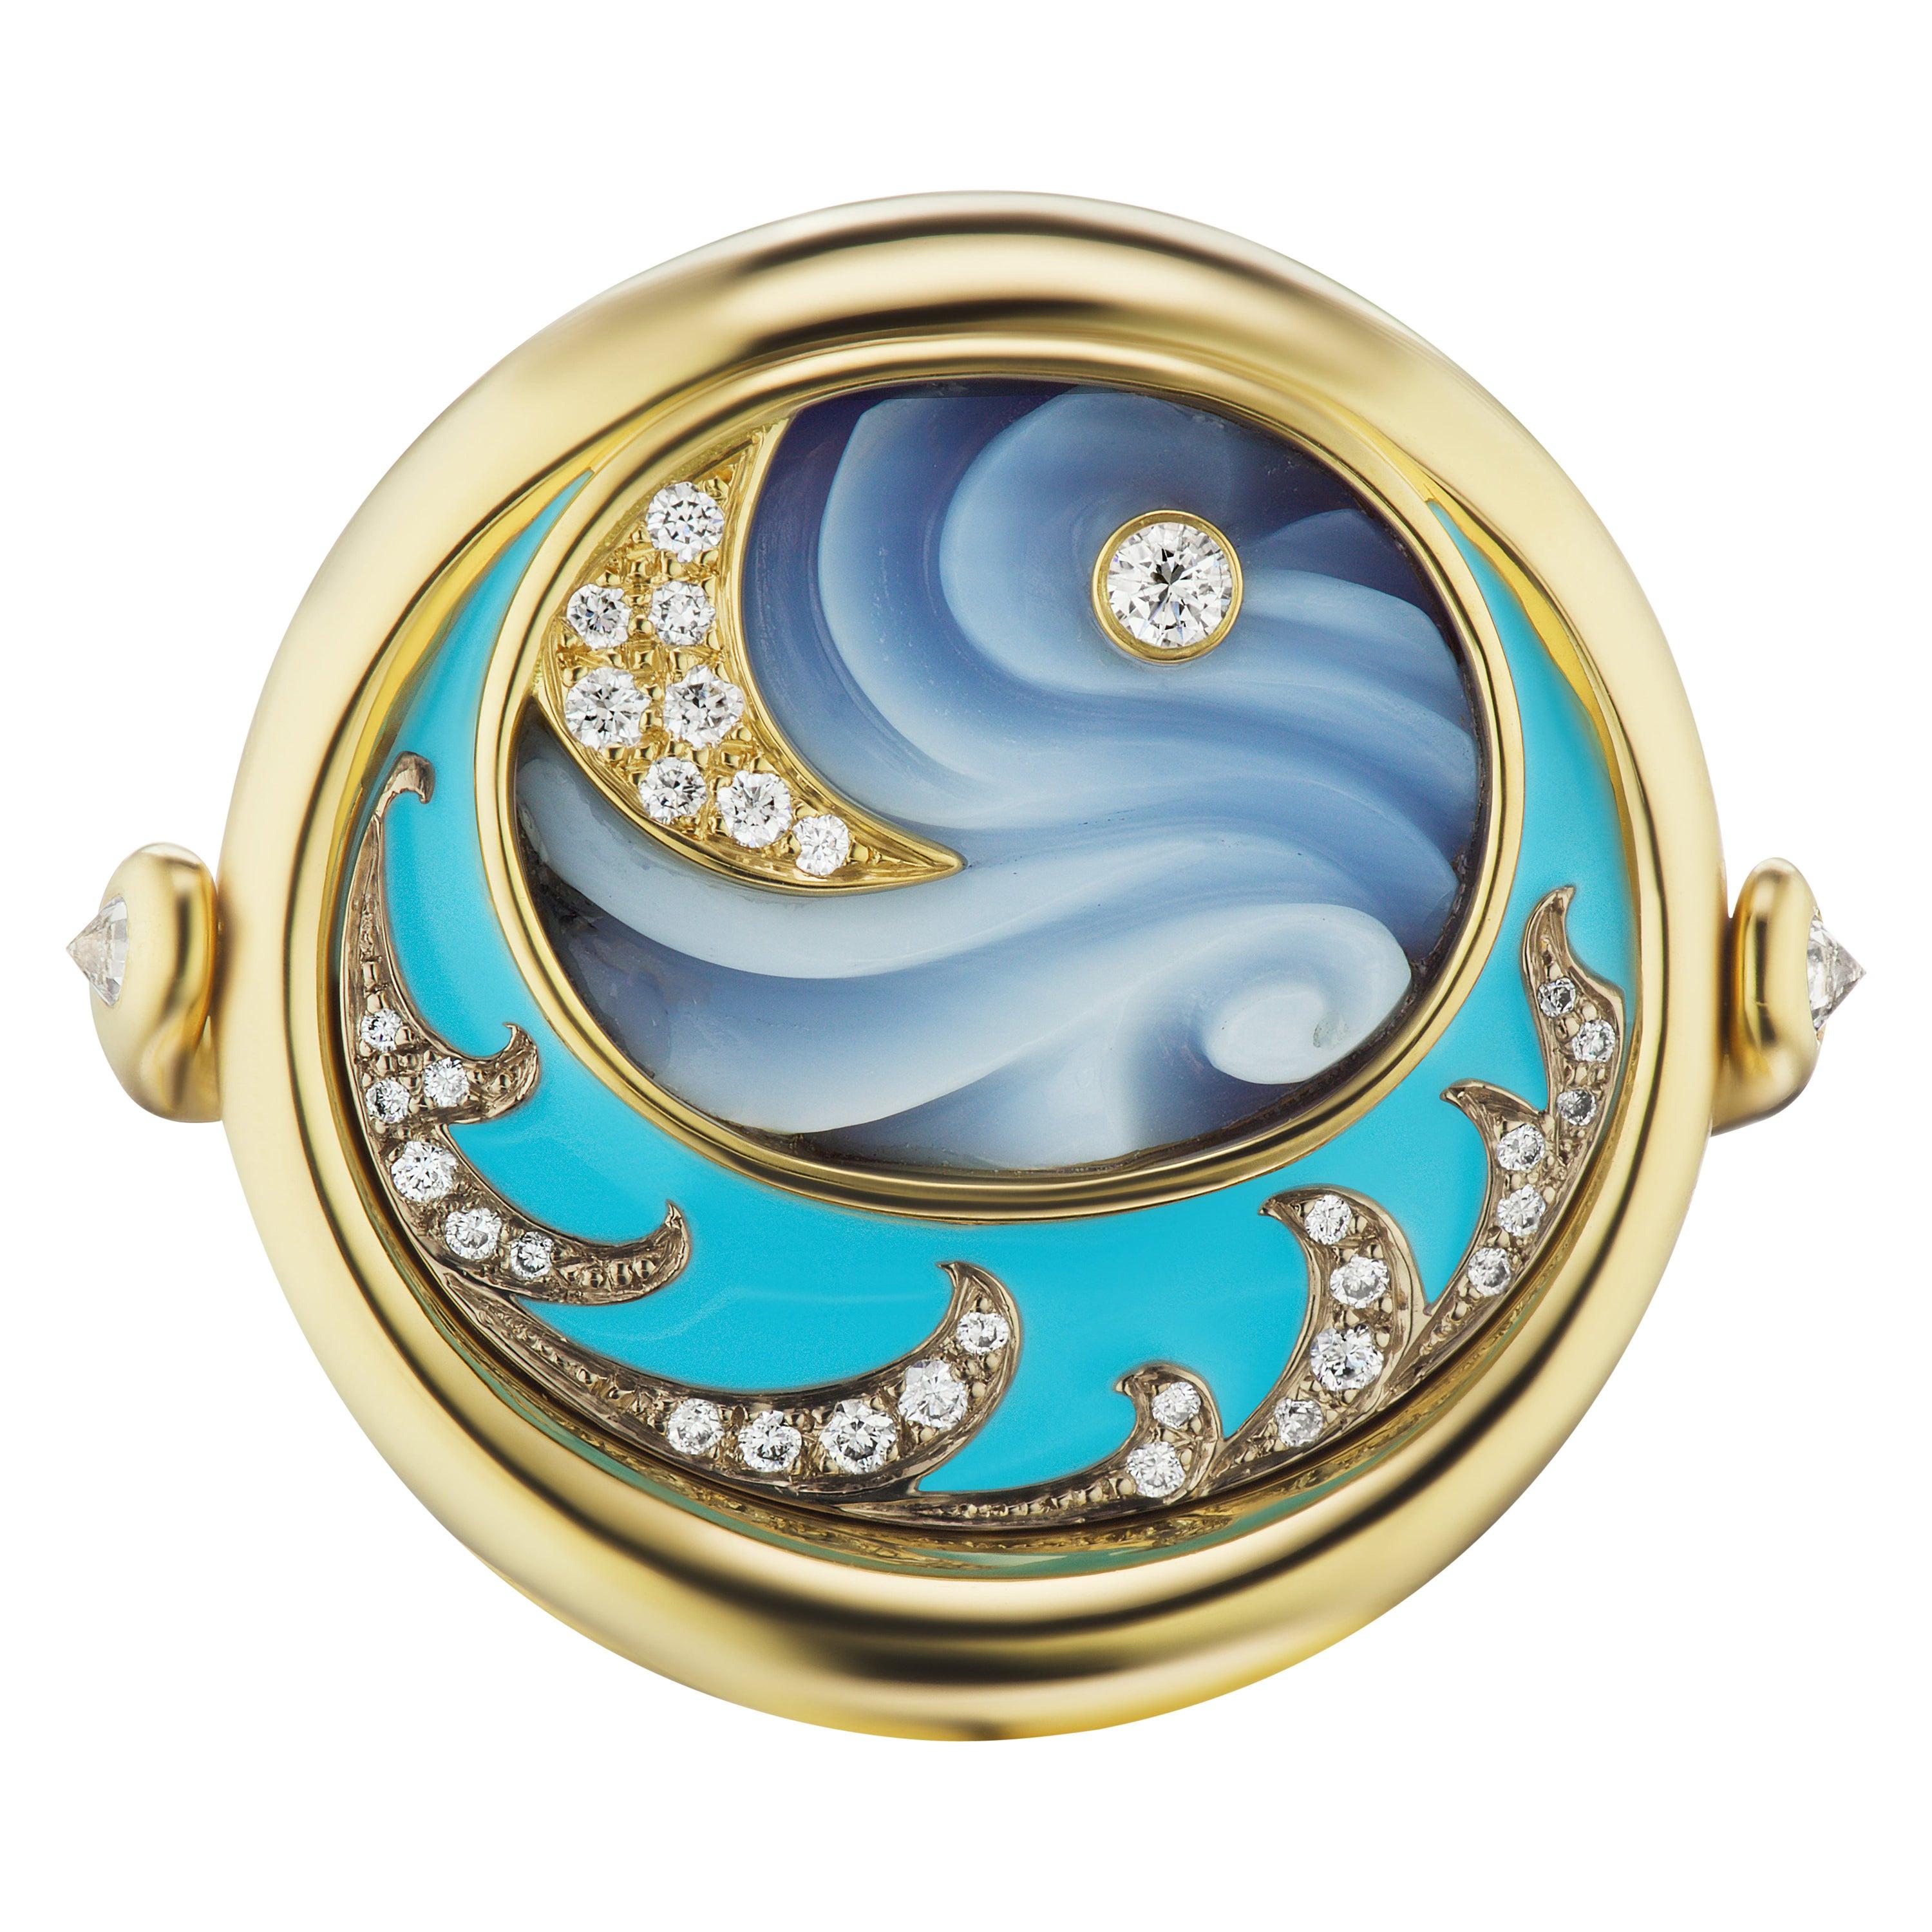 AnaKatarina 4 Elements "Water" Ring in Agate, Diamond, Yellow Gold, and Enamel